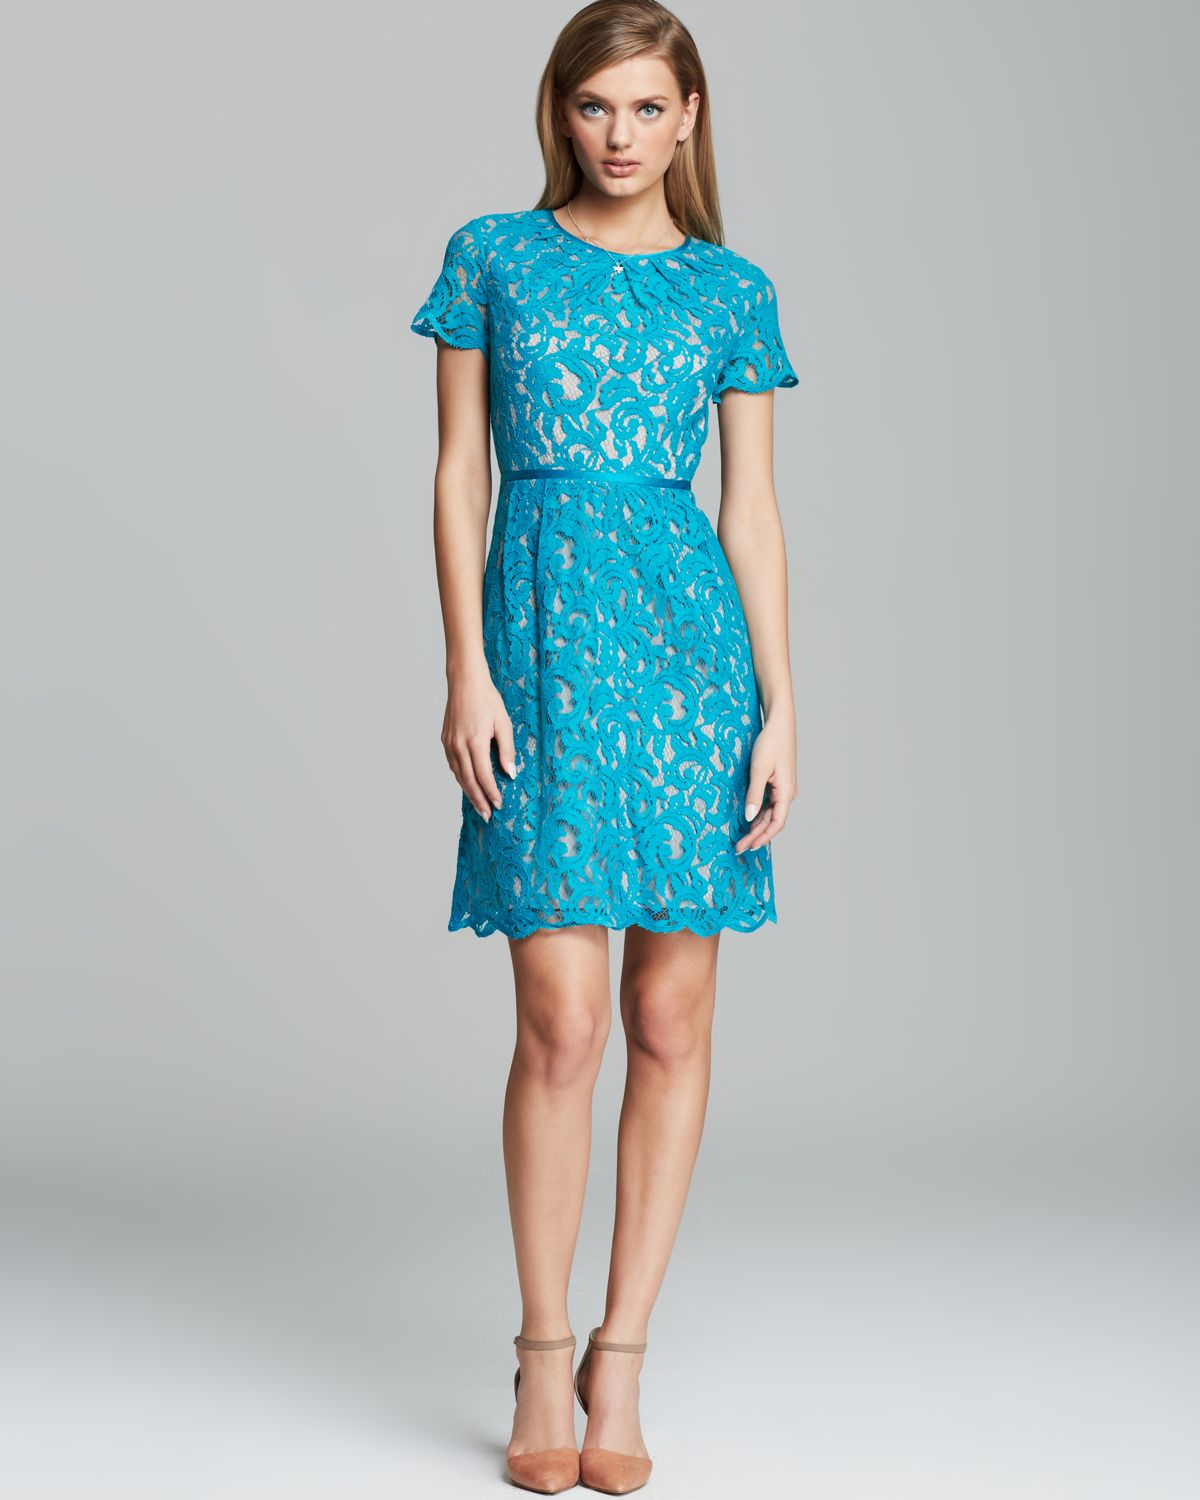 Adrianna Papell Dress Short Sleeve Lace Fit and Flare in Blue | Lyst